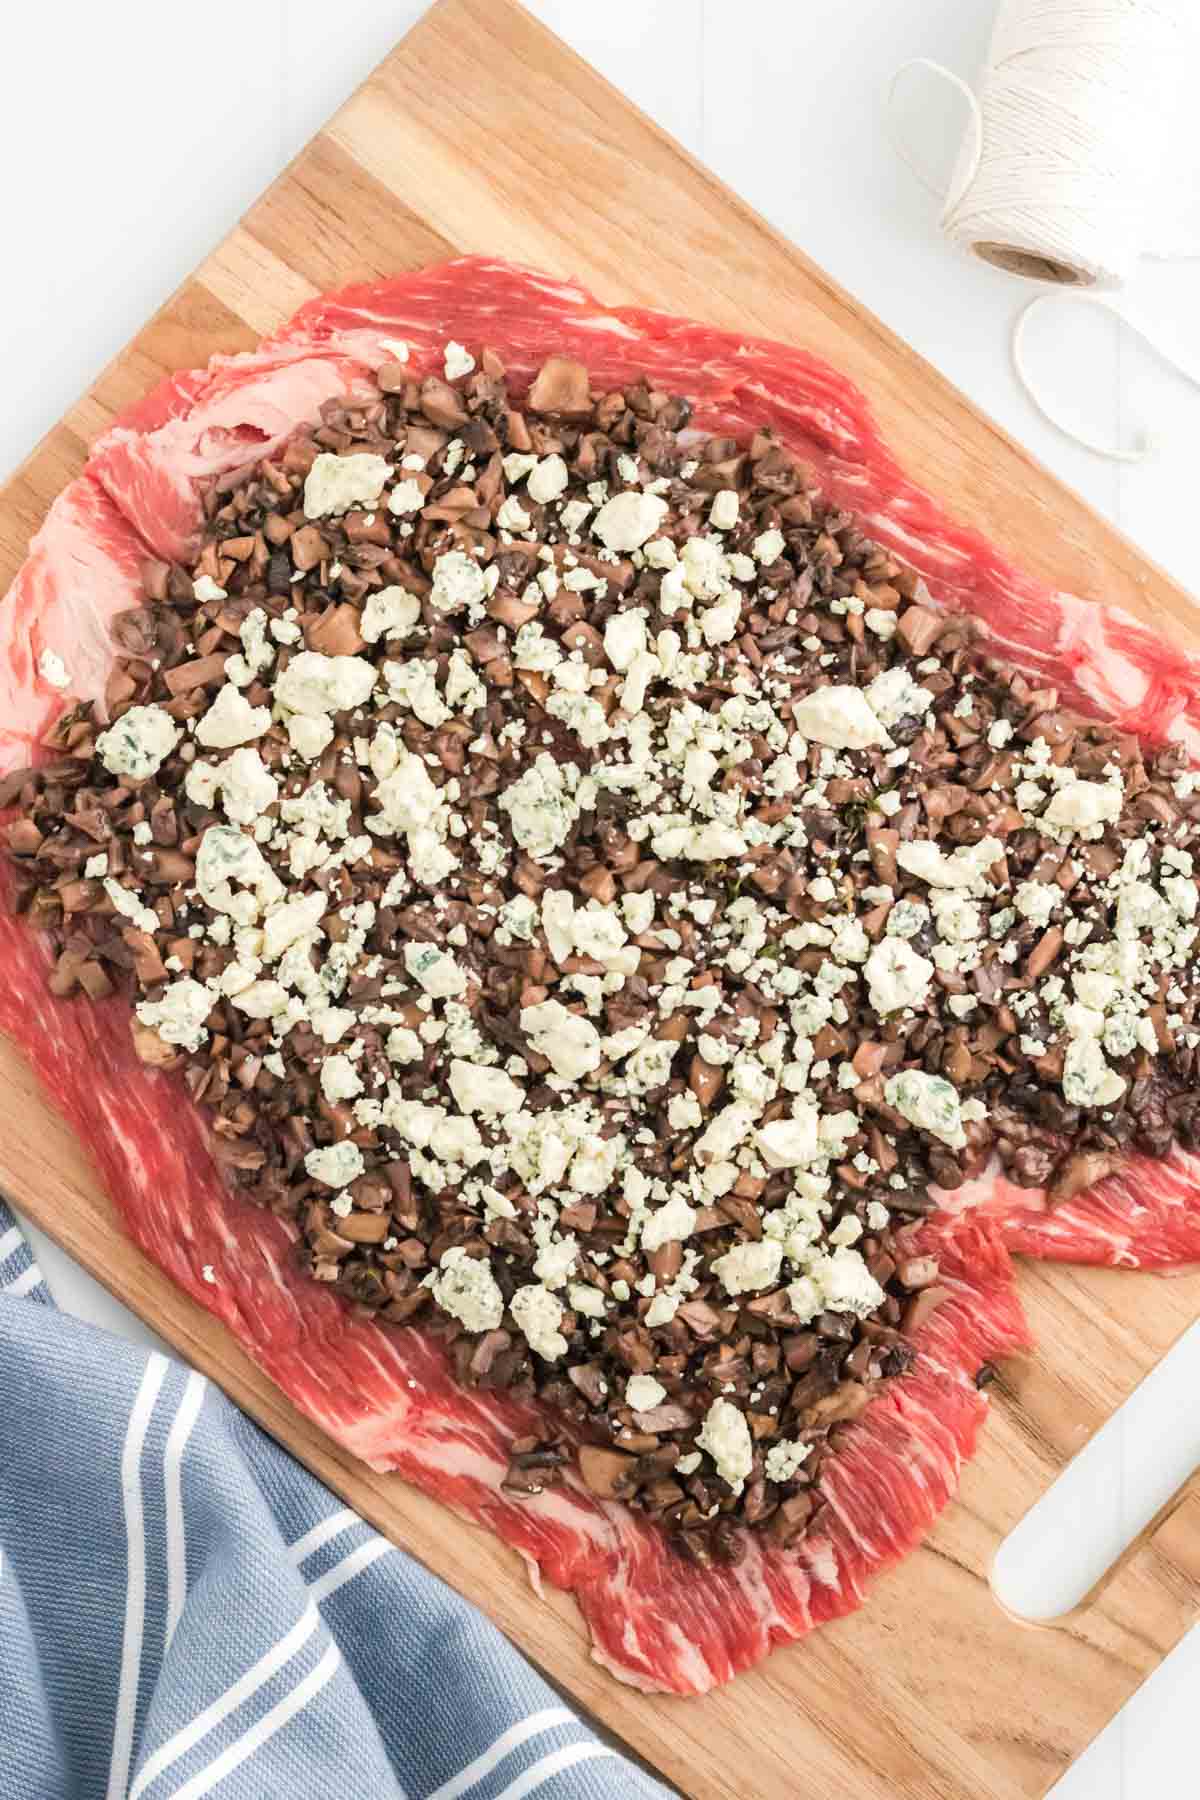 Gorgonzola cheese crumbled over mushroom duxelles, spread over a tenderized cut of flank steak.